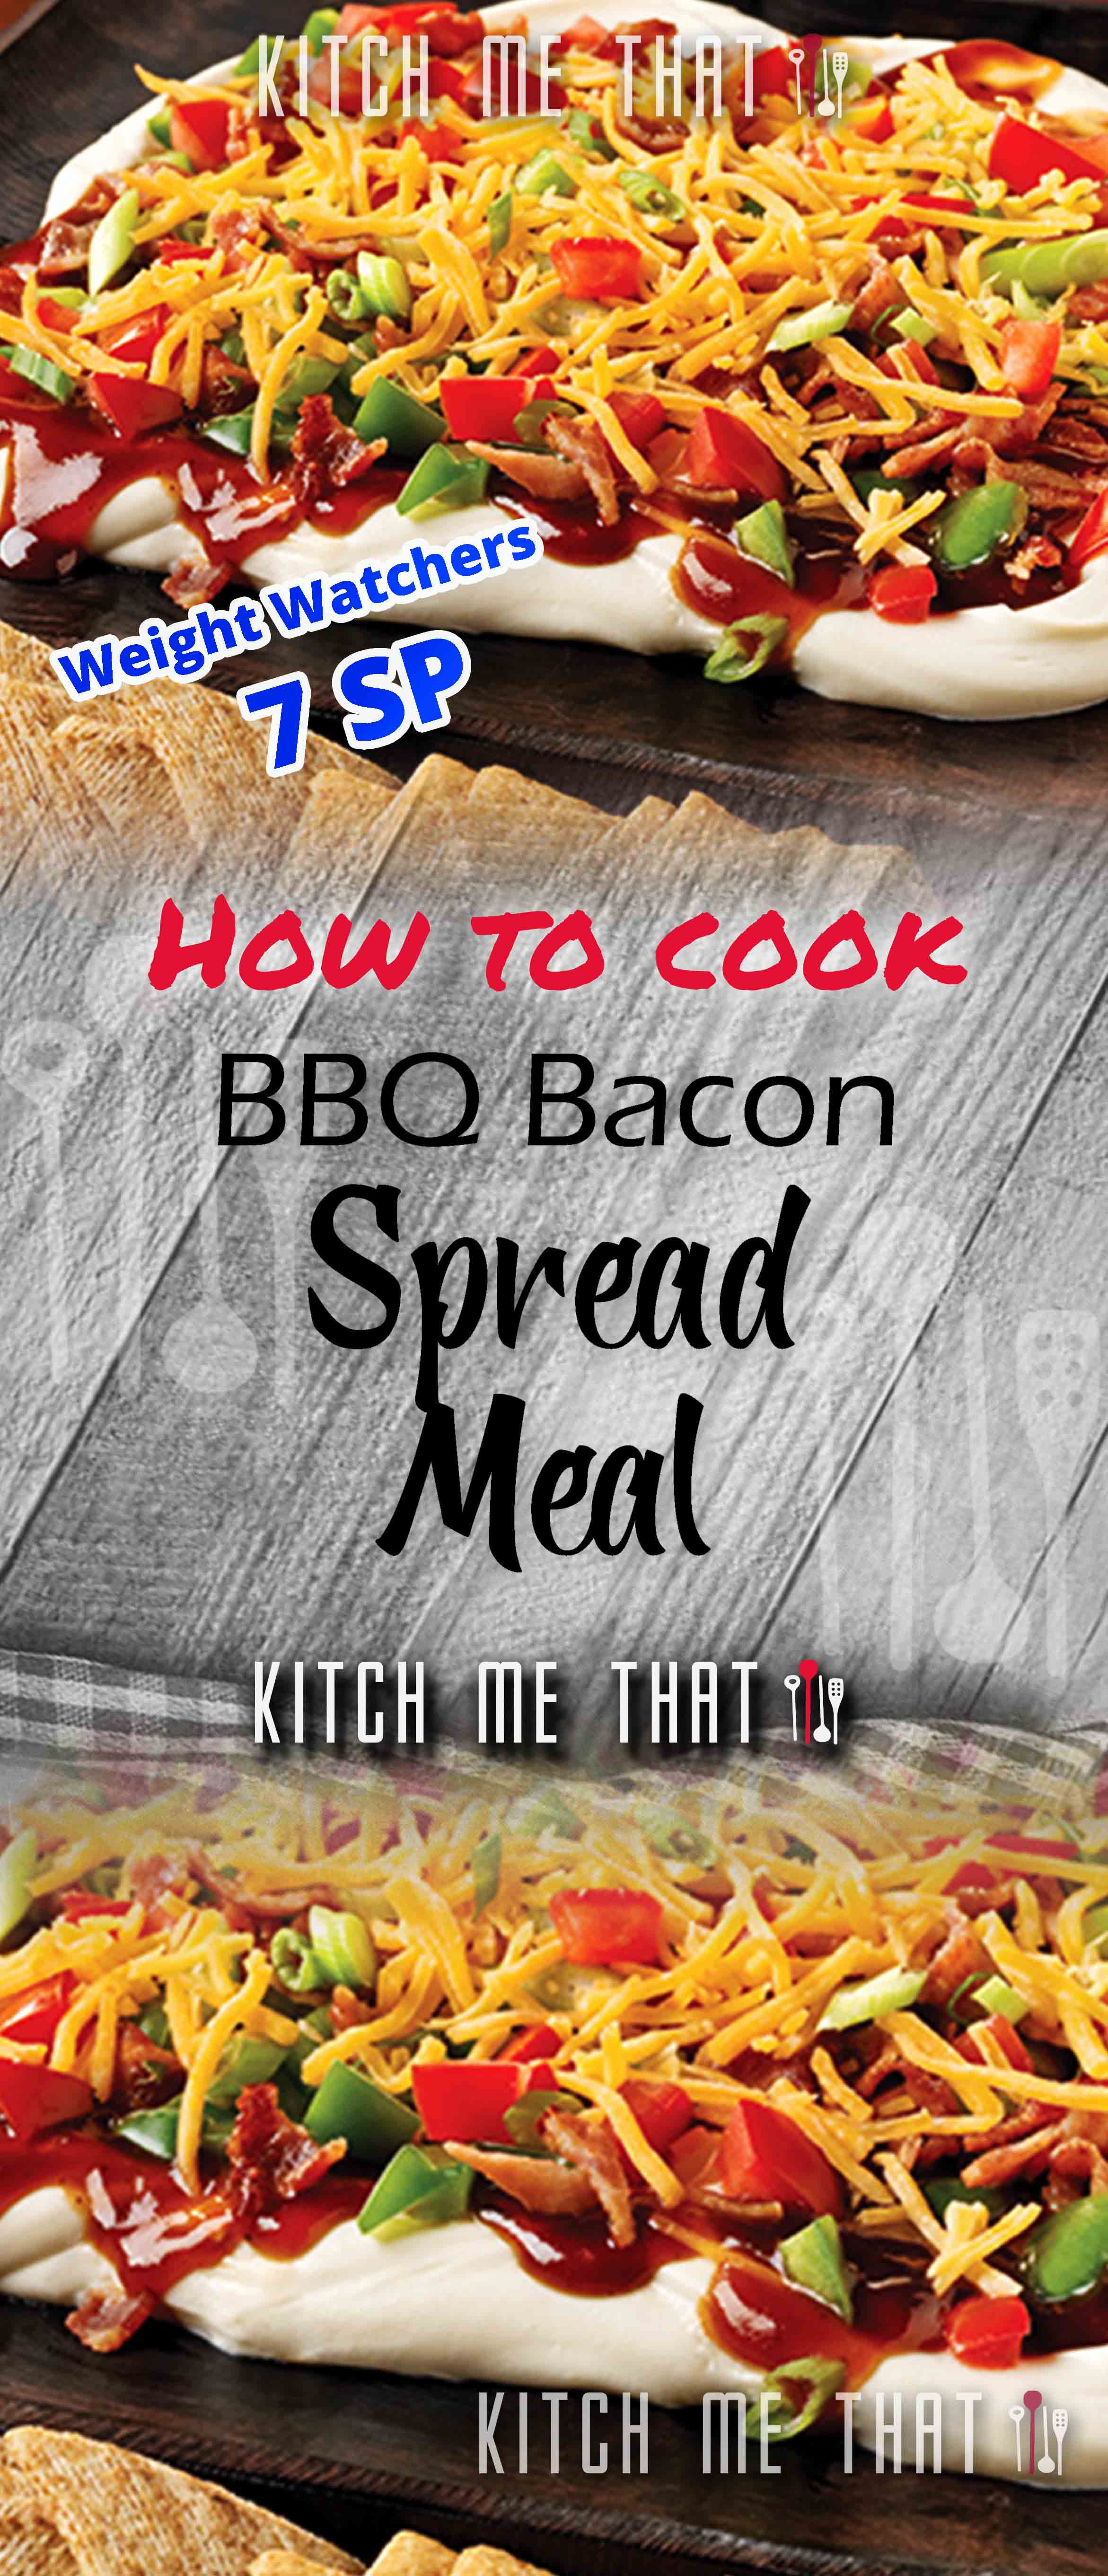 Exclusive Bbq Bacon Spread NEW 2021